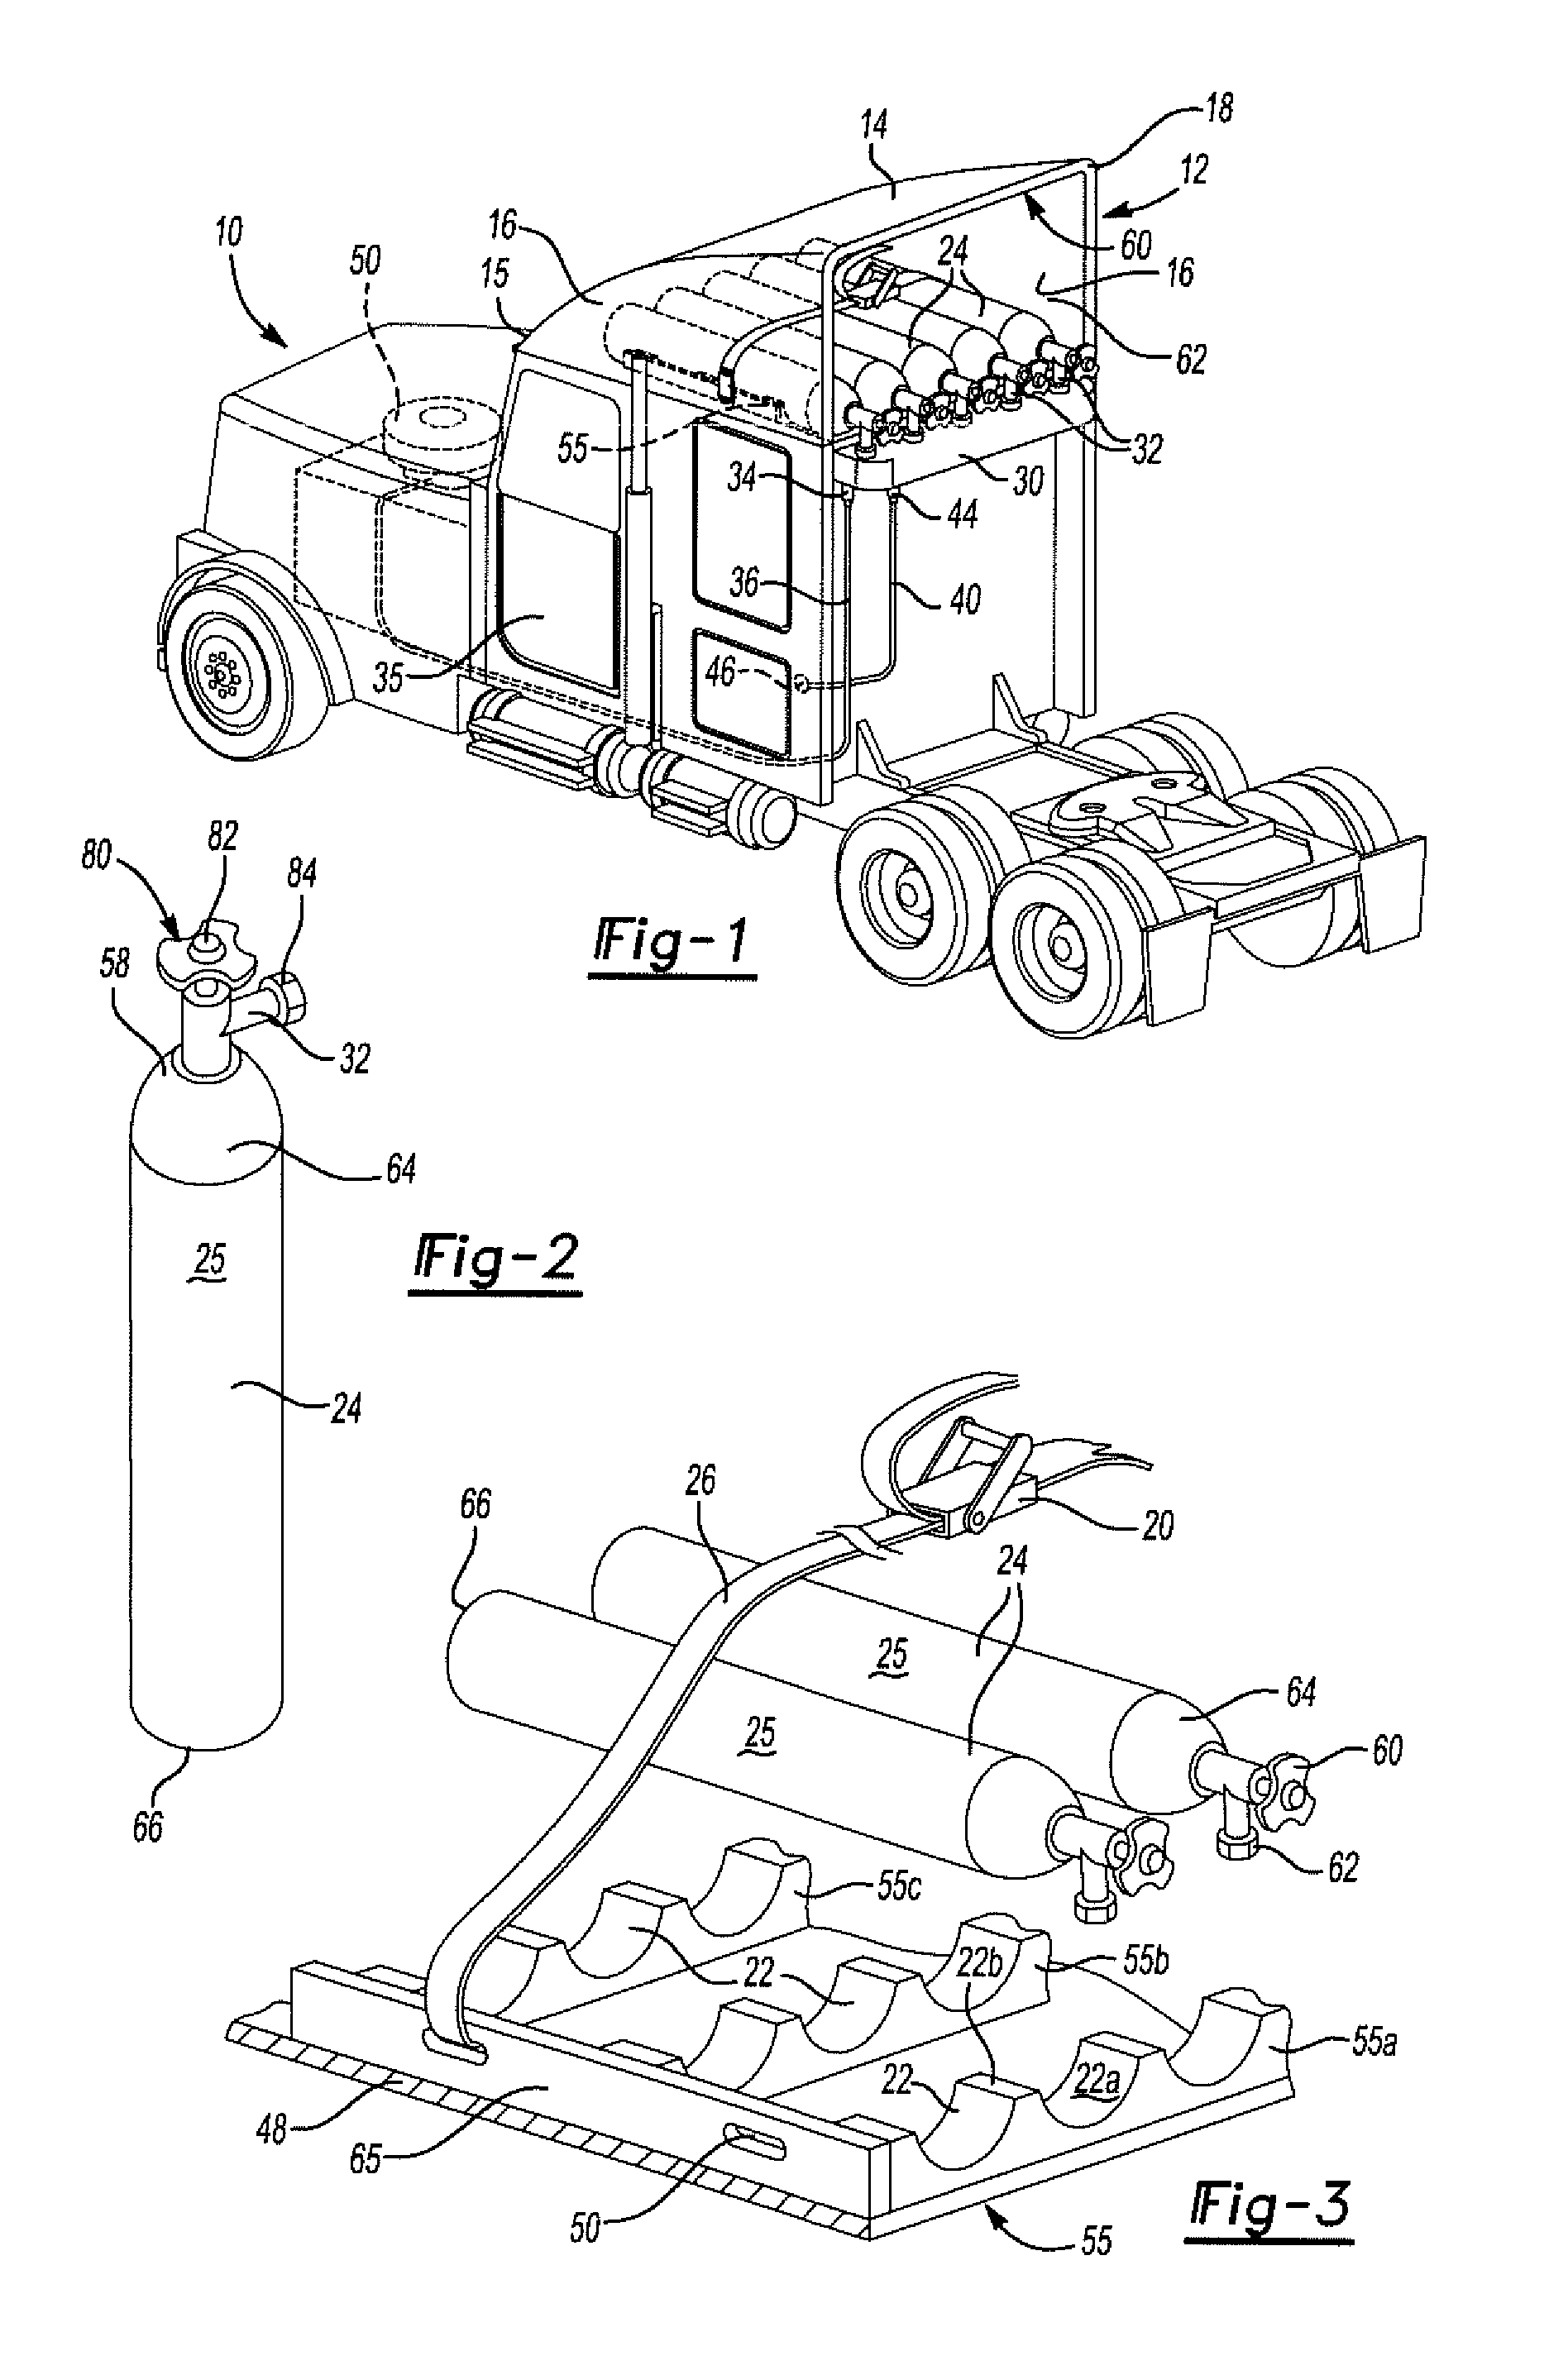 Method and apparatus for mounting cng/ang tanks to heavy trucks